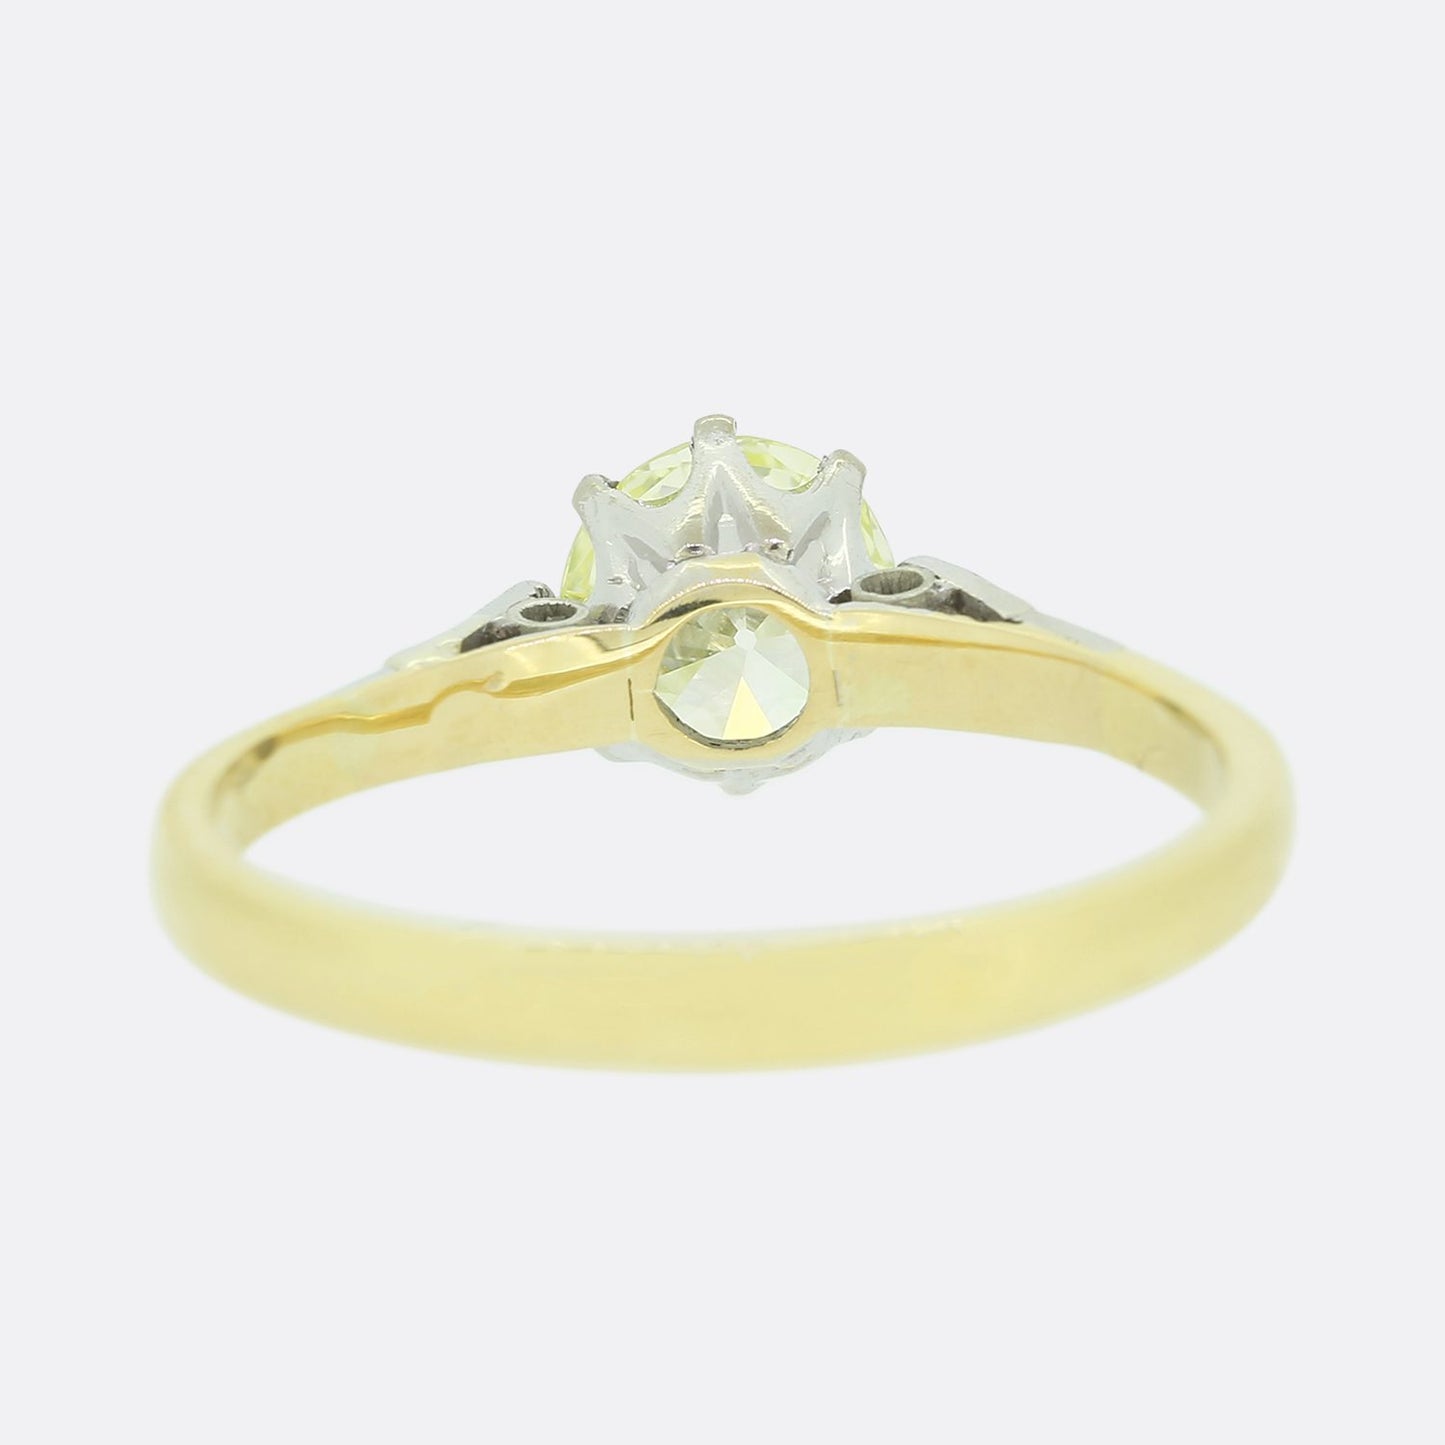 Vintage 0.95 Carat Old Cut Diamond Solitaire Ring